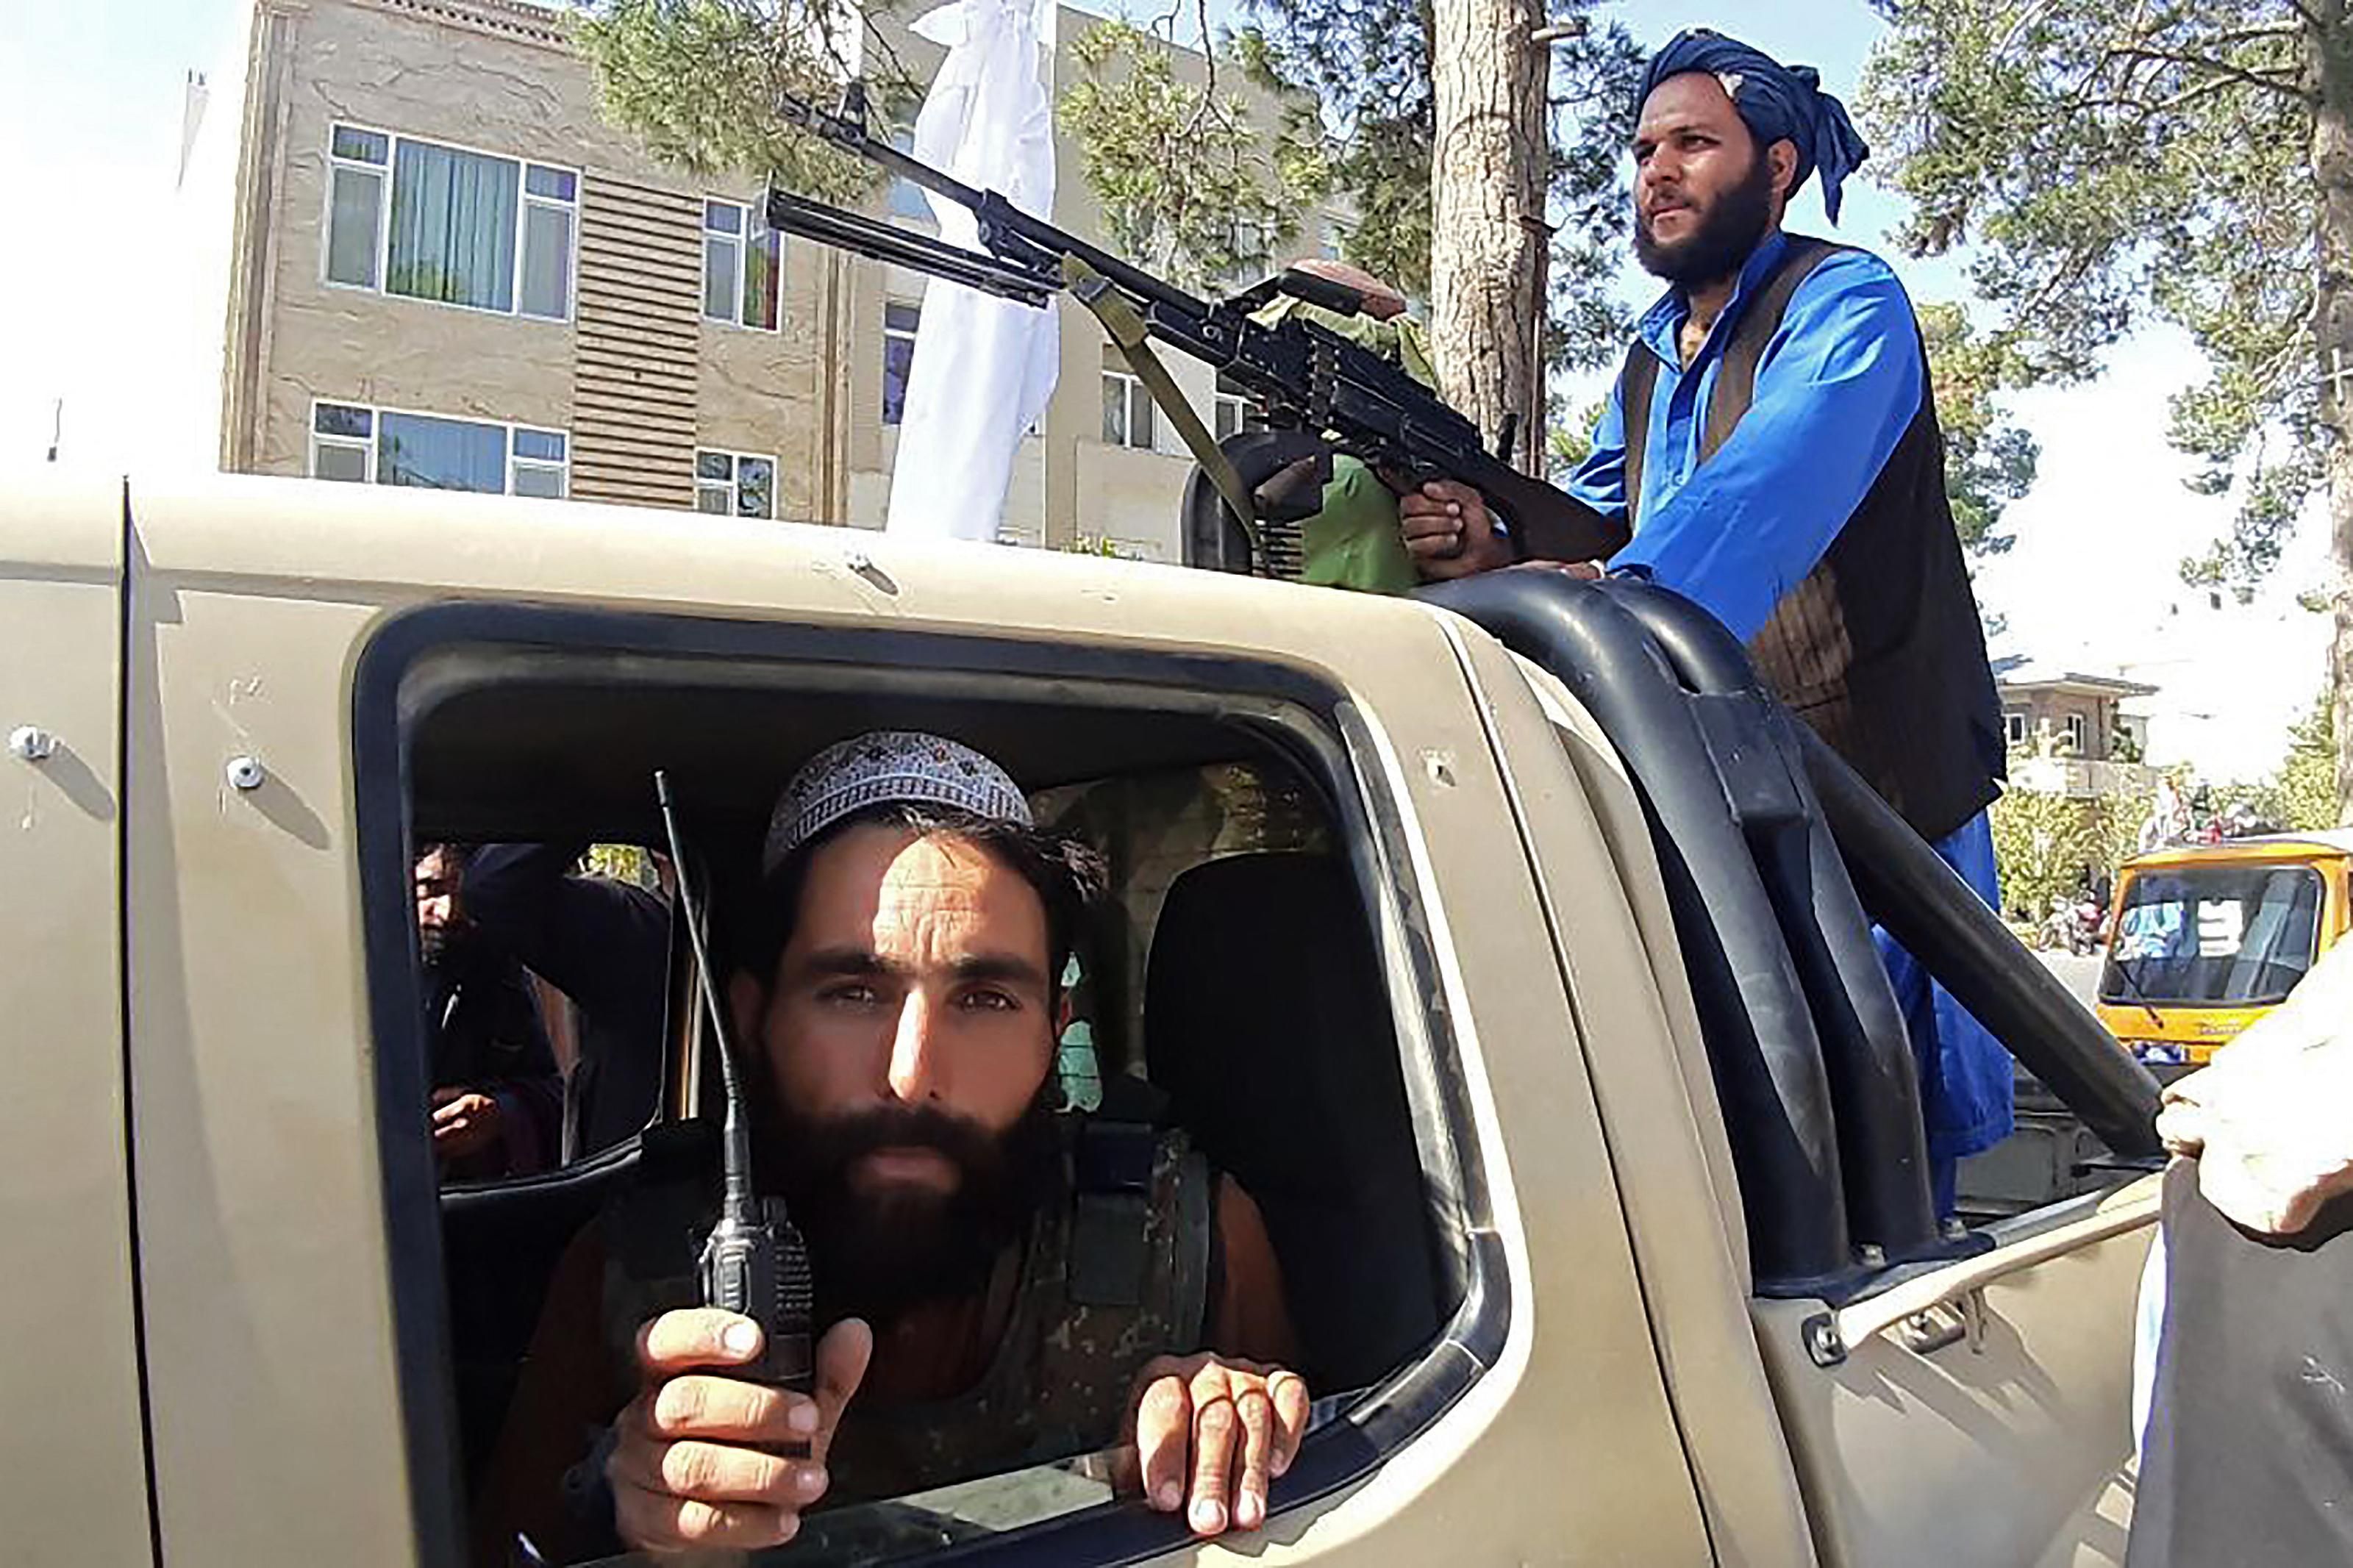 Taliban fighters in a vehicle along the roadside in Herat